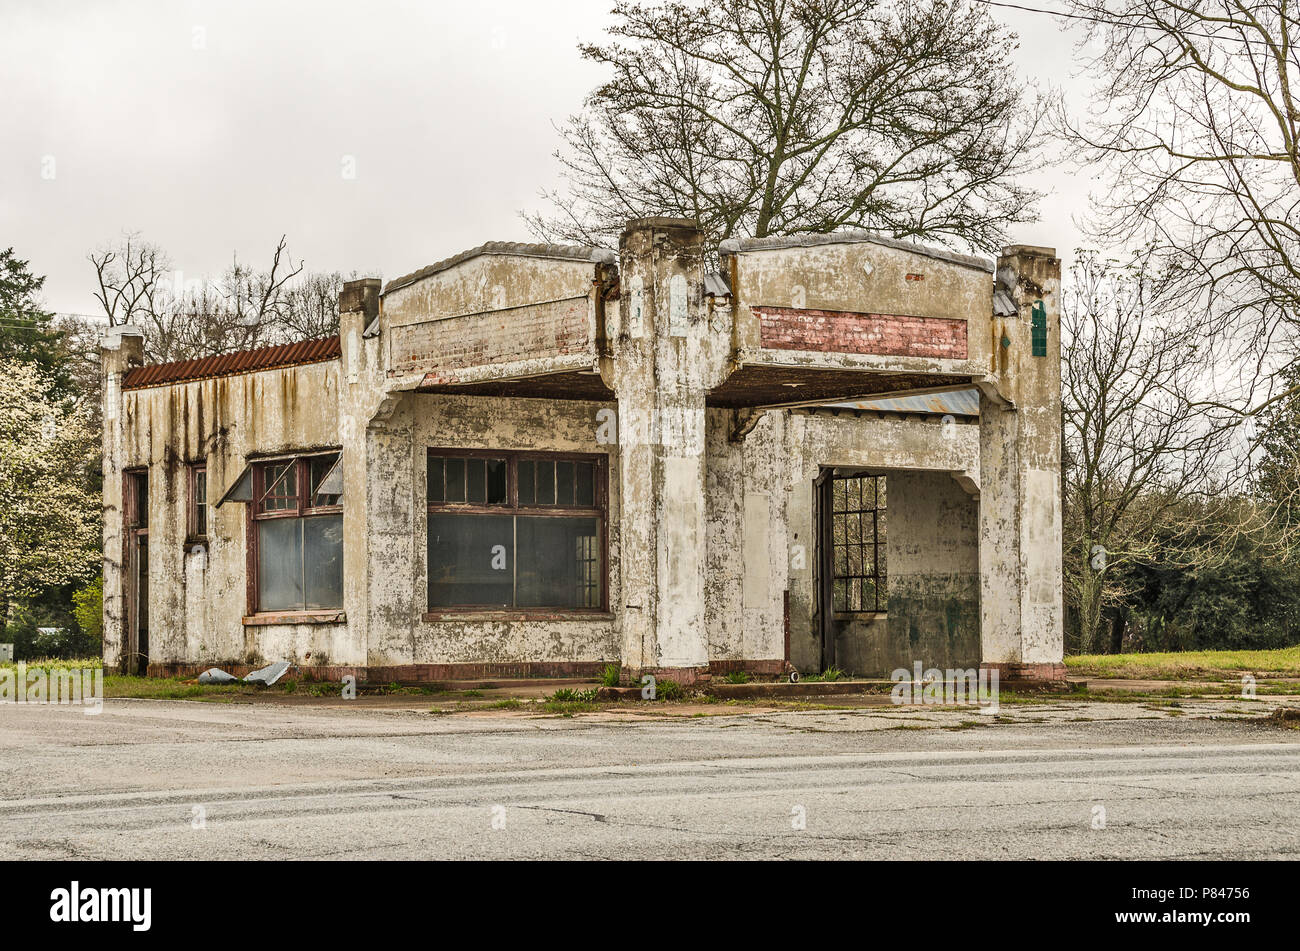 Beautiful vintage service station with character needs to be freshened up a bit. Stock Photo